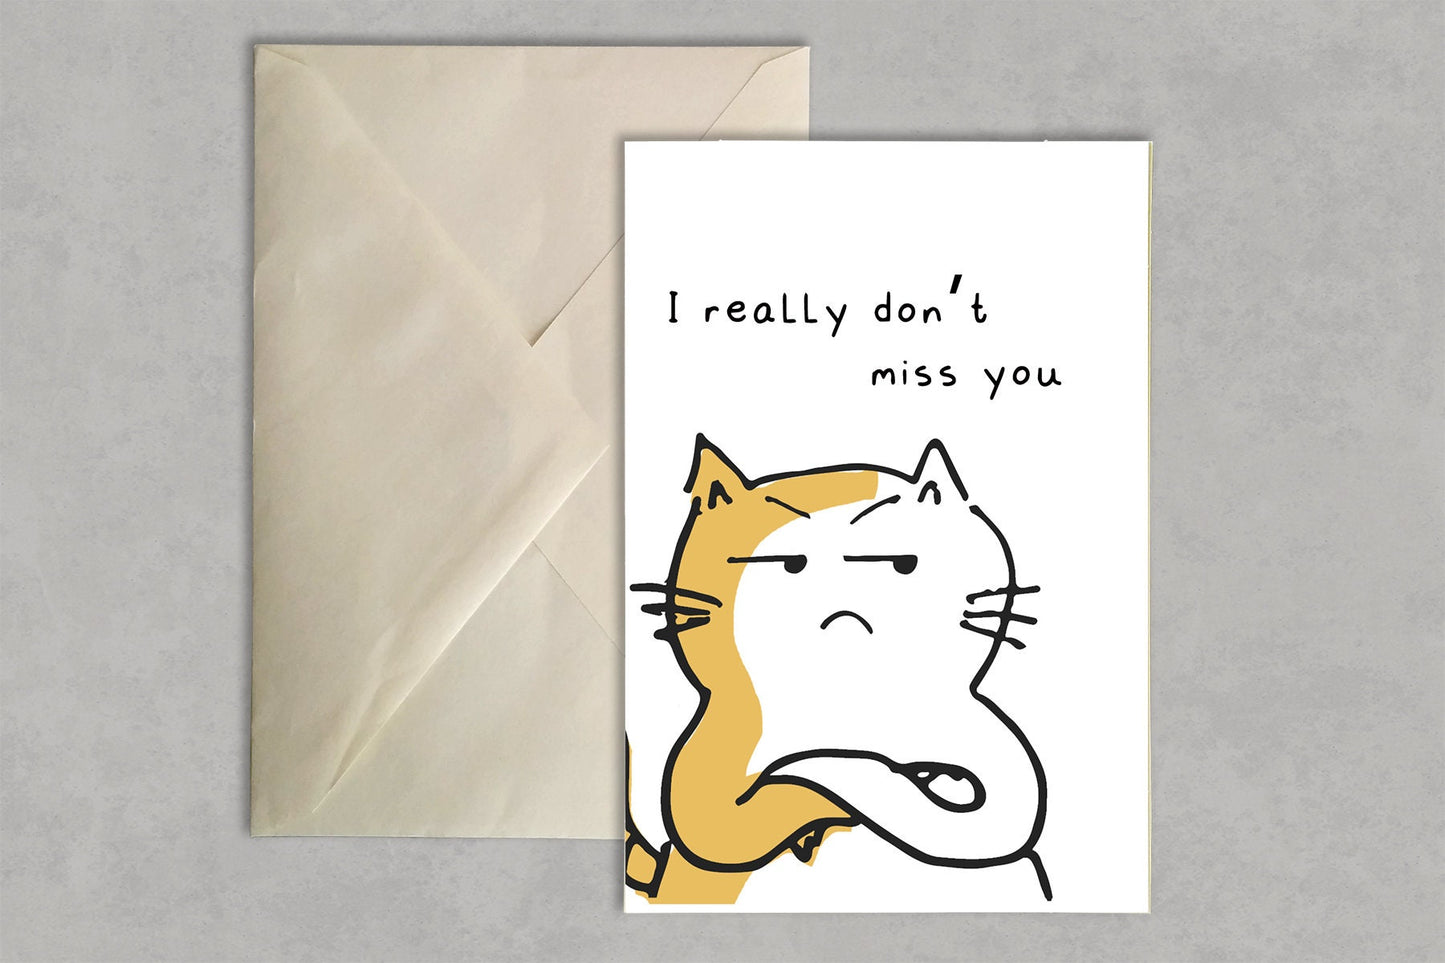 I Don't Miss You Card, Funny Angry Cat Card, Ironic Cards, Just Because, Rude Humour Card, Sarcastic Cards, Ex BF GF Gifts, Breakup Card